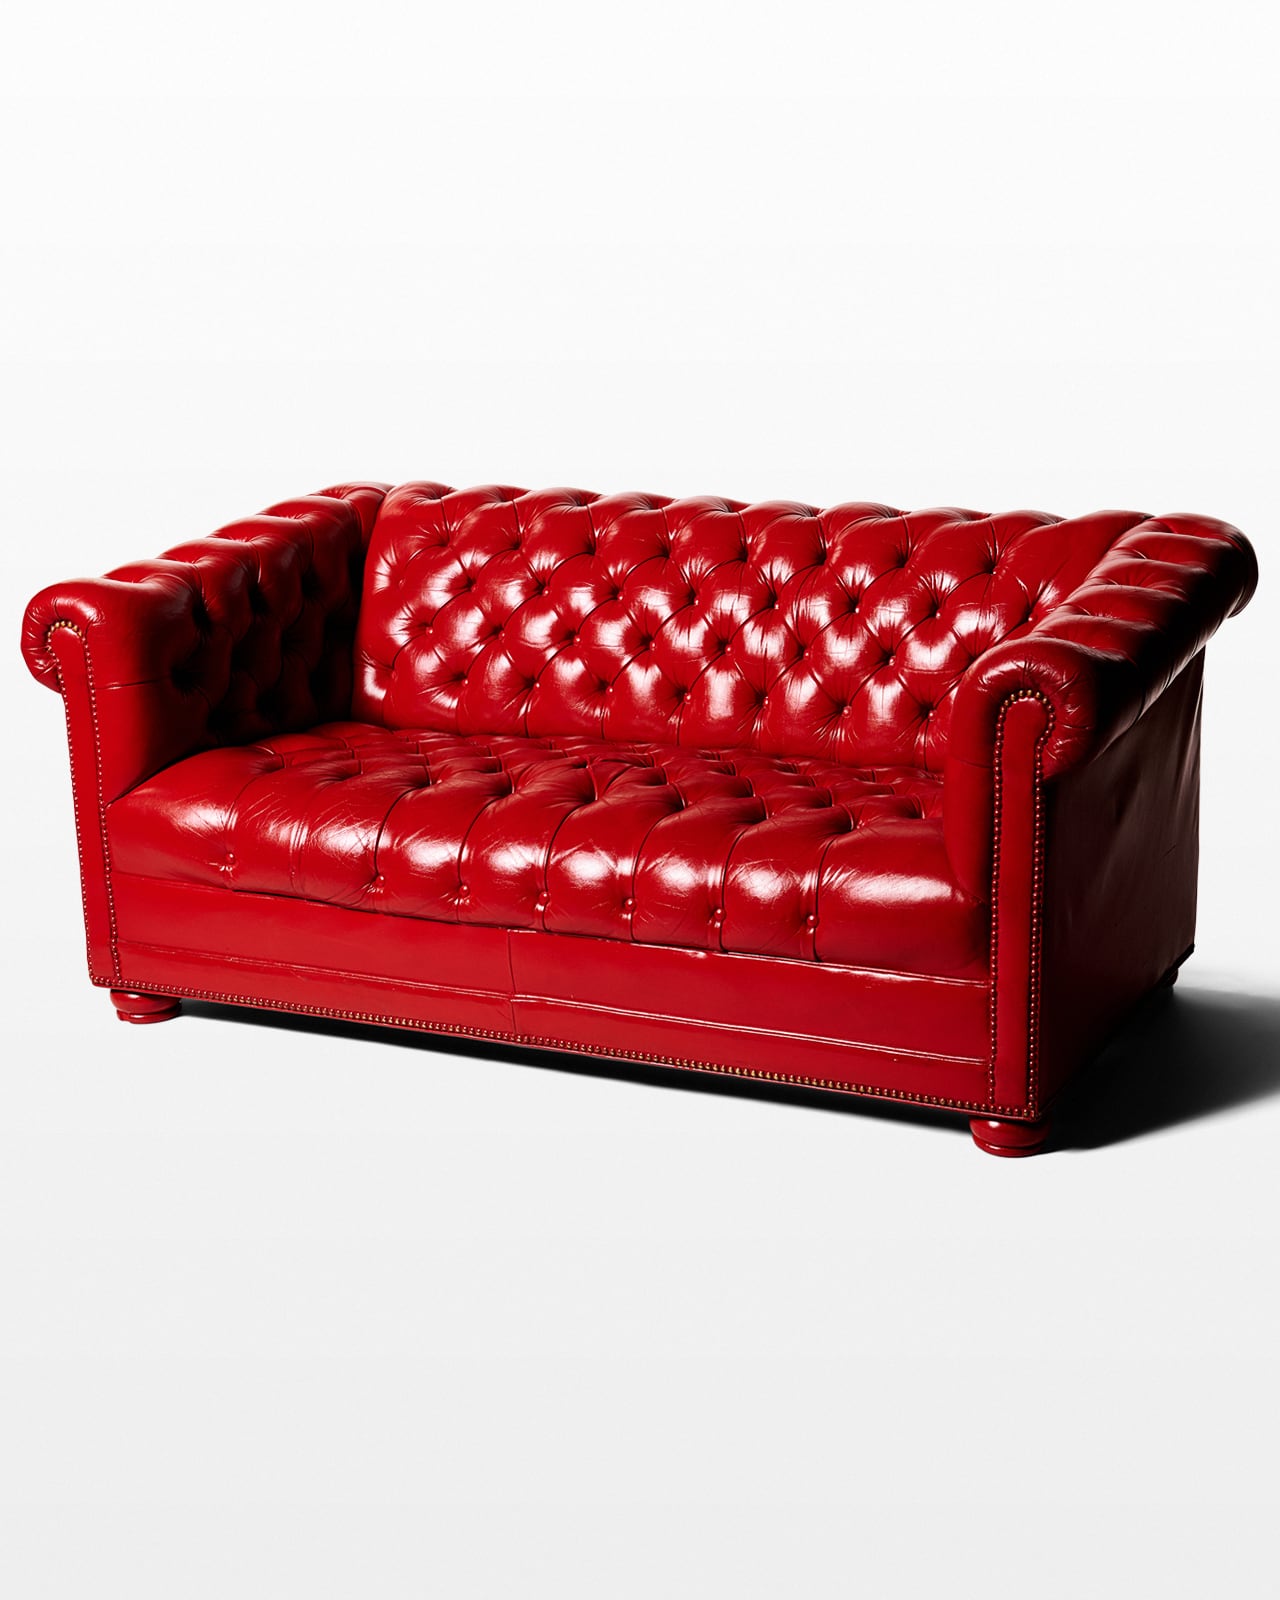 Co002 Red Leather Sofa Prop Al